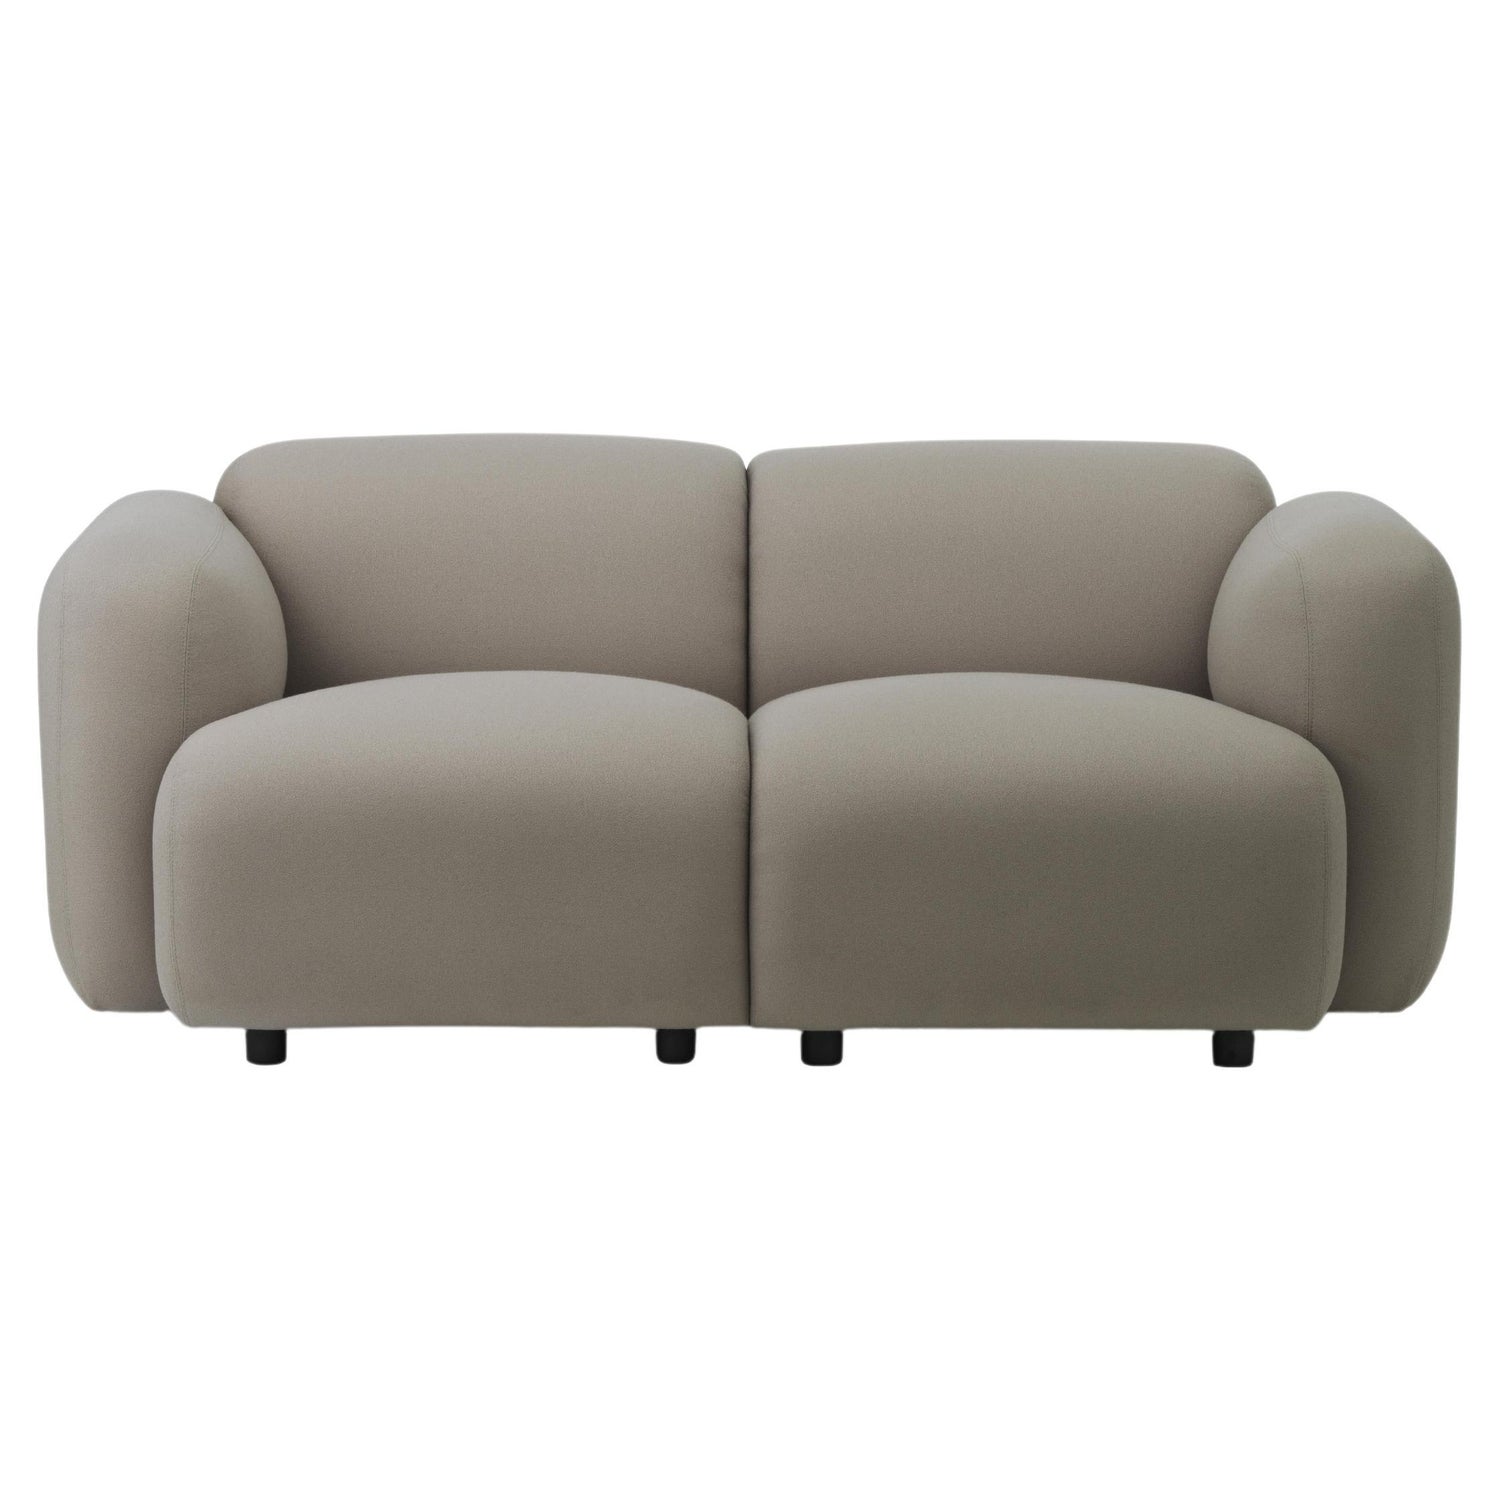 Tacchini Julep Sofa in Stock Designed by Jonas Wagell in STOCK at 1stDibs